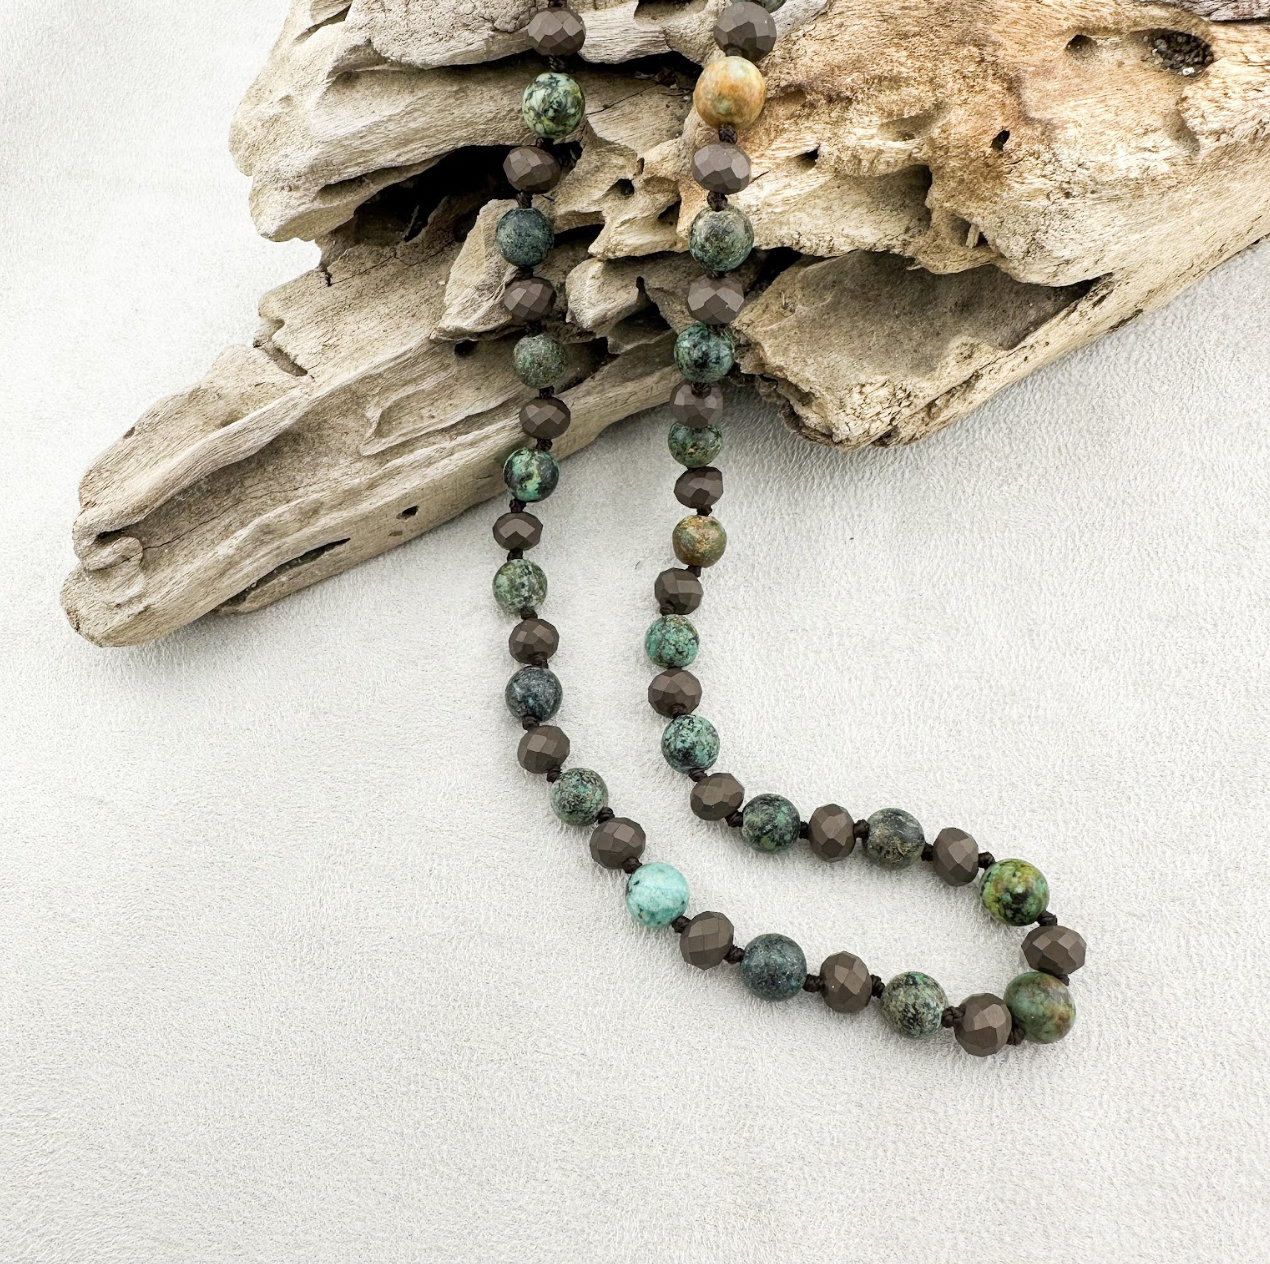 African Turquoise Stone Mala Necklace